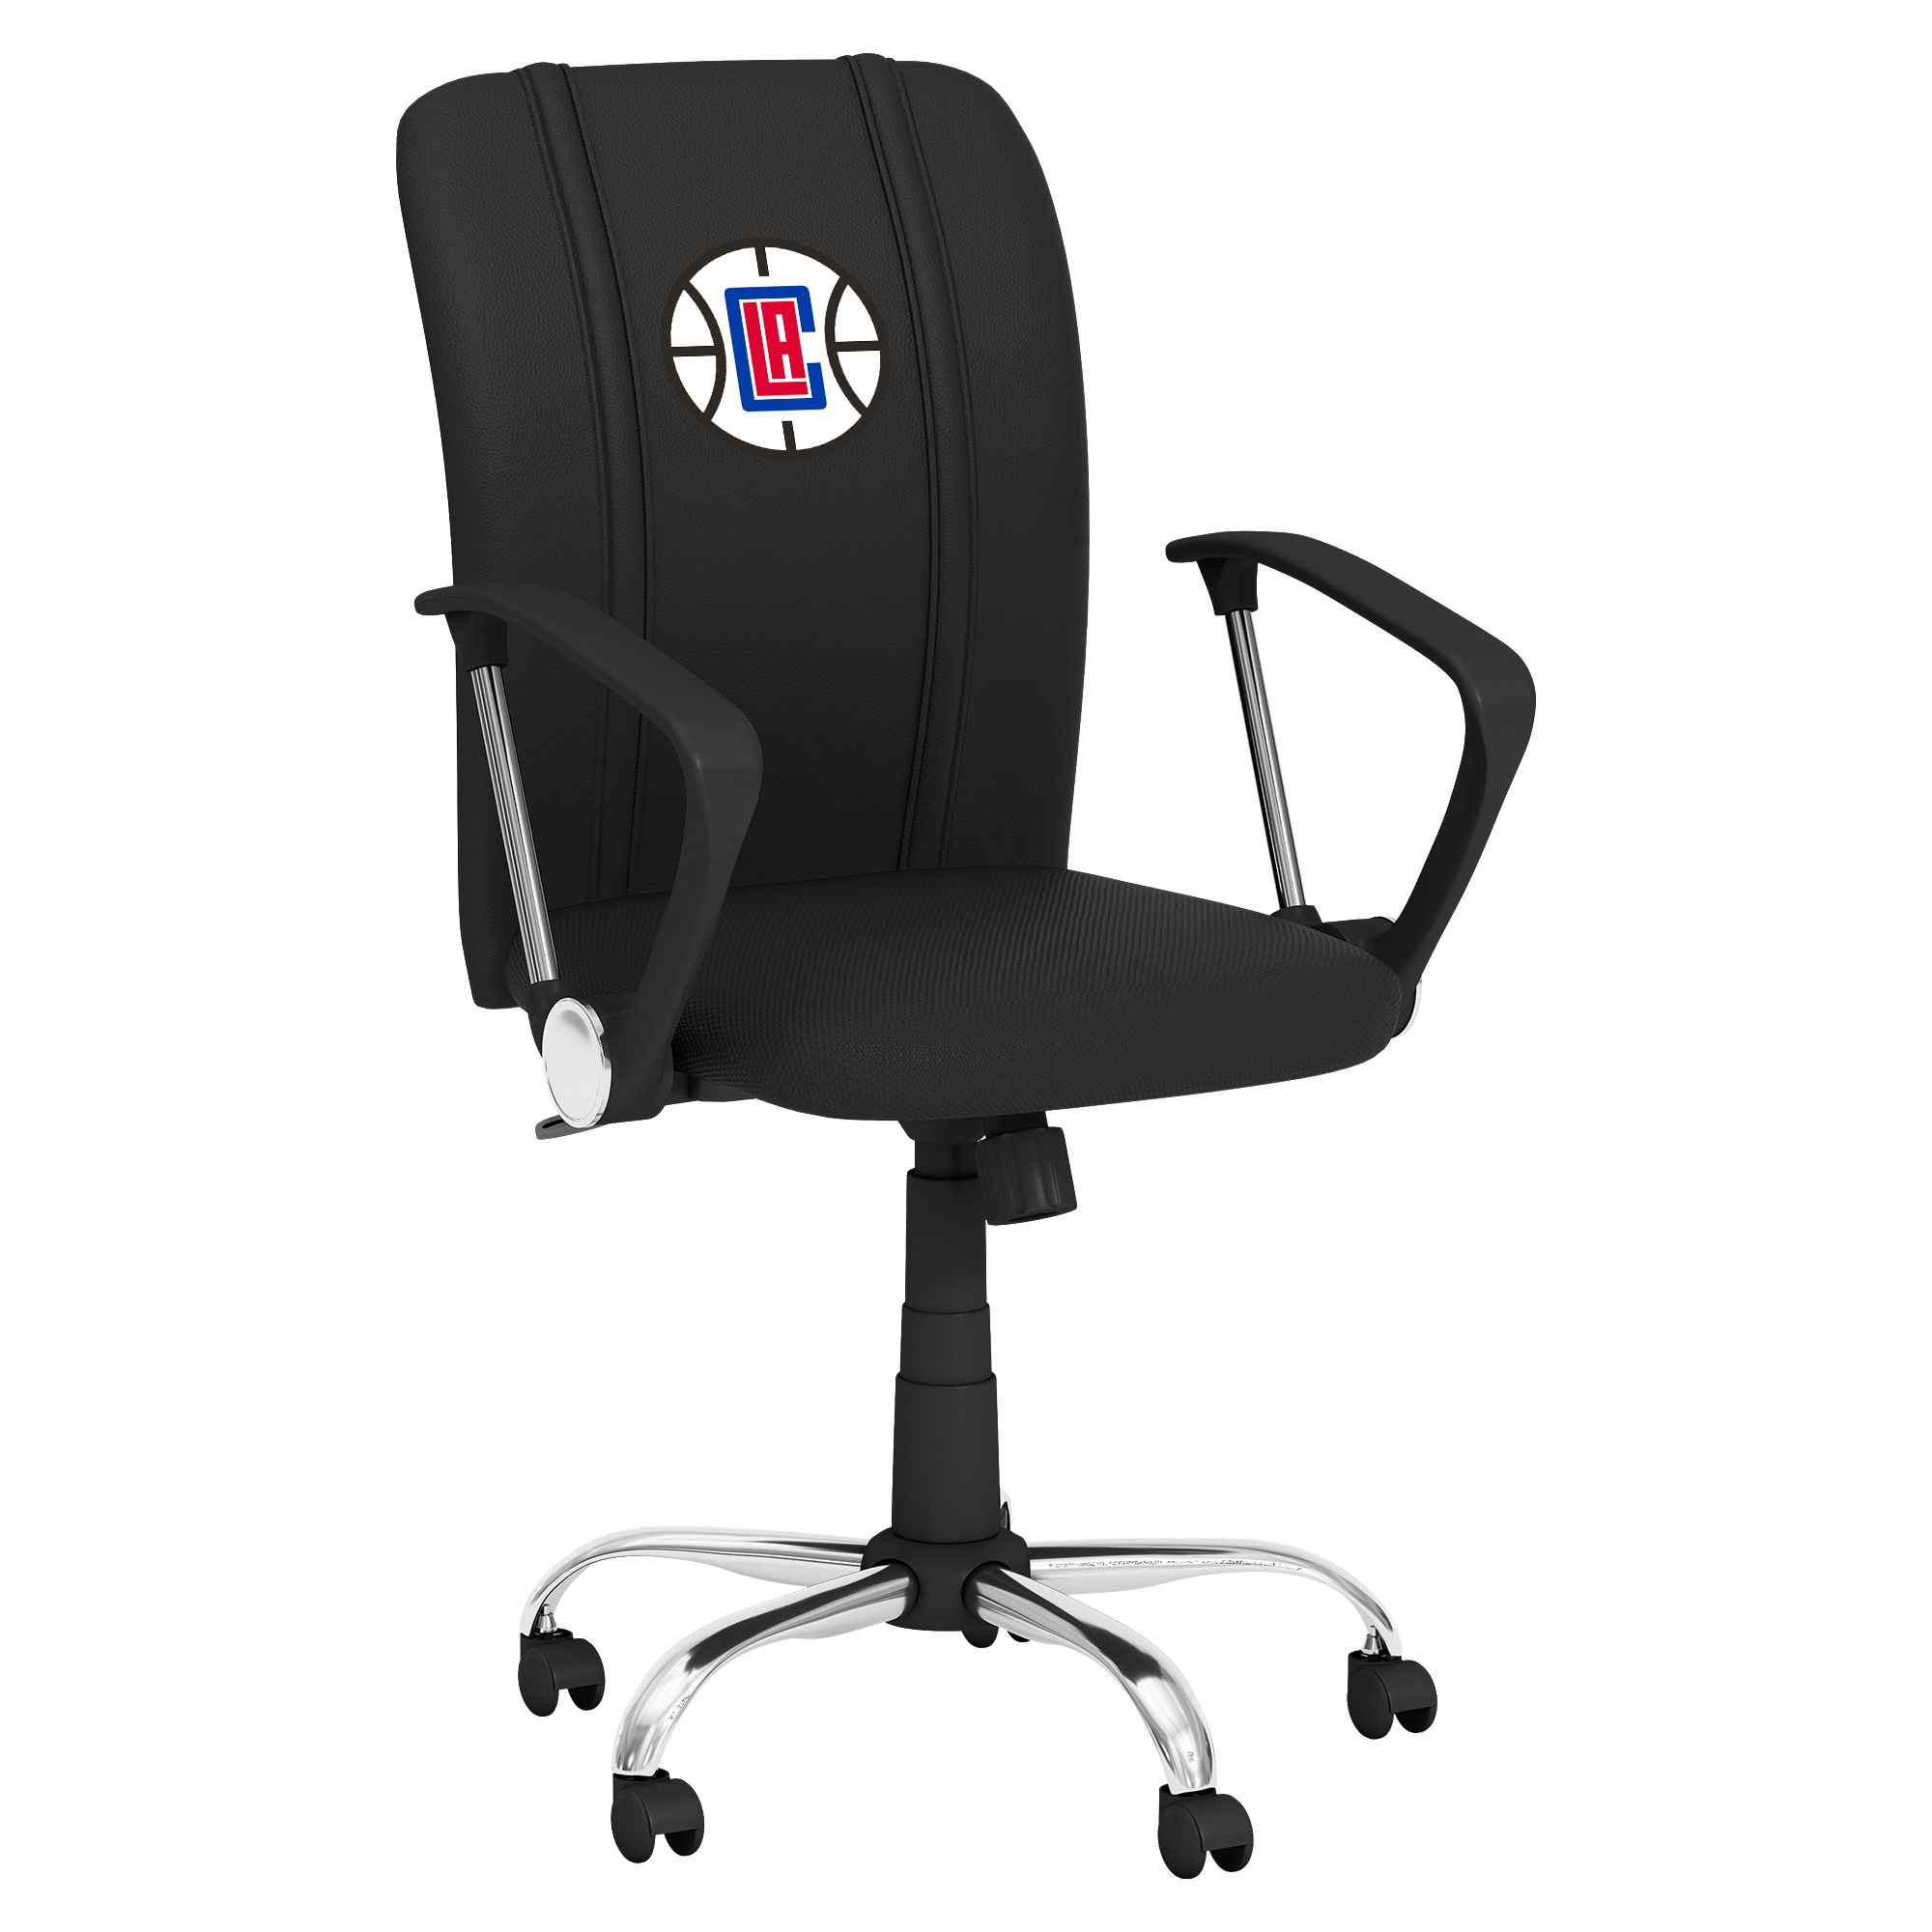 Los Angeles Clippers Curve Task Chair with Los Angeles Clippers Primary